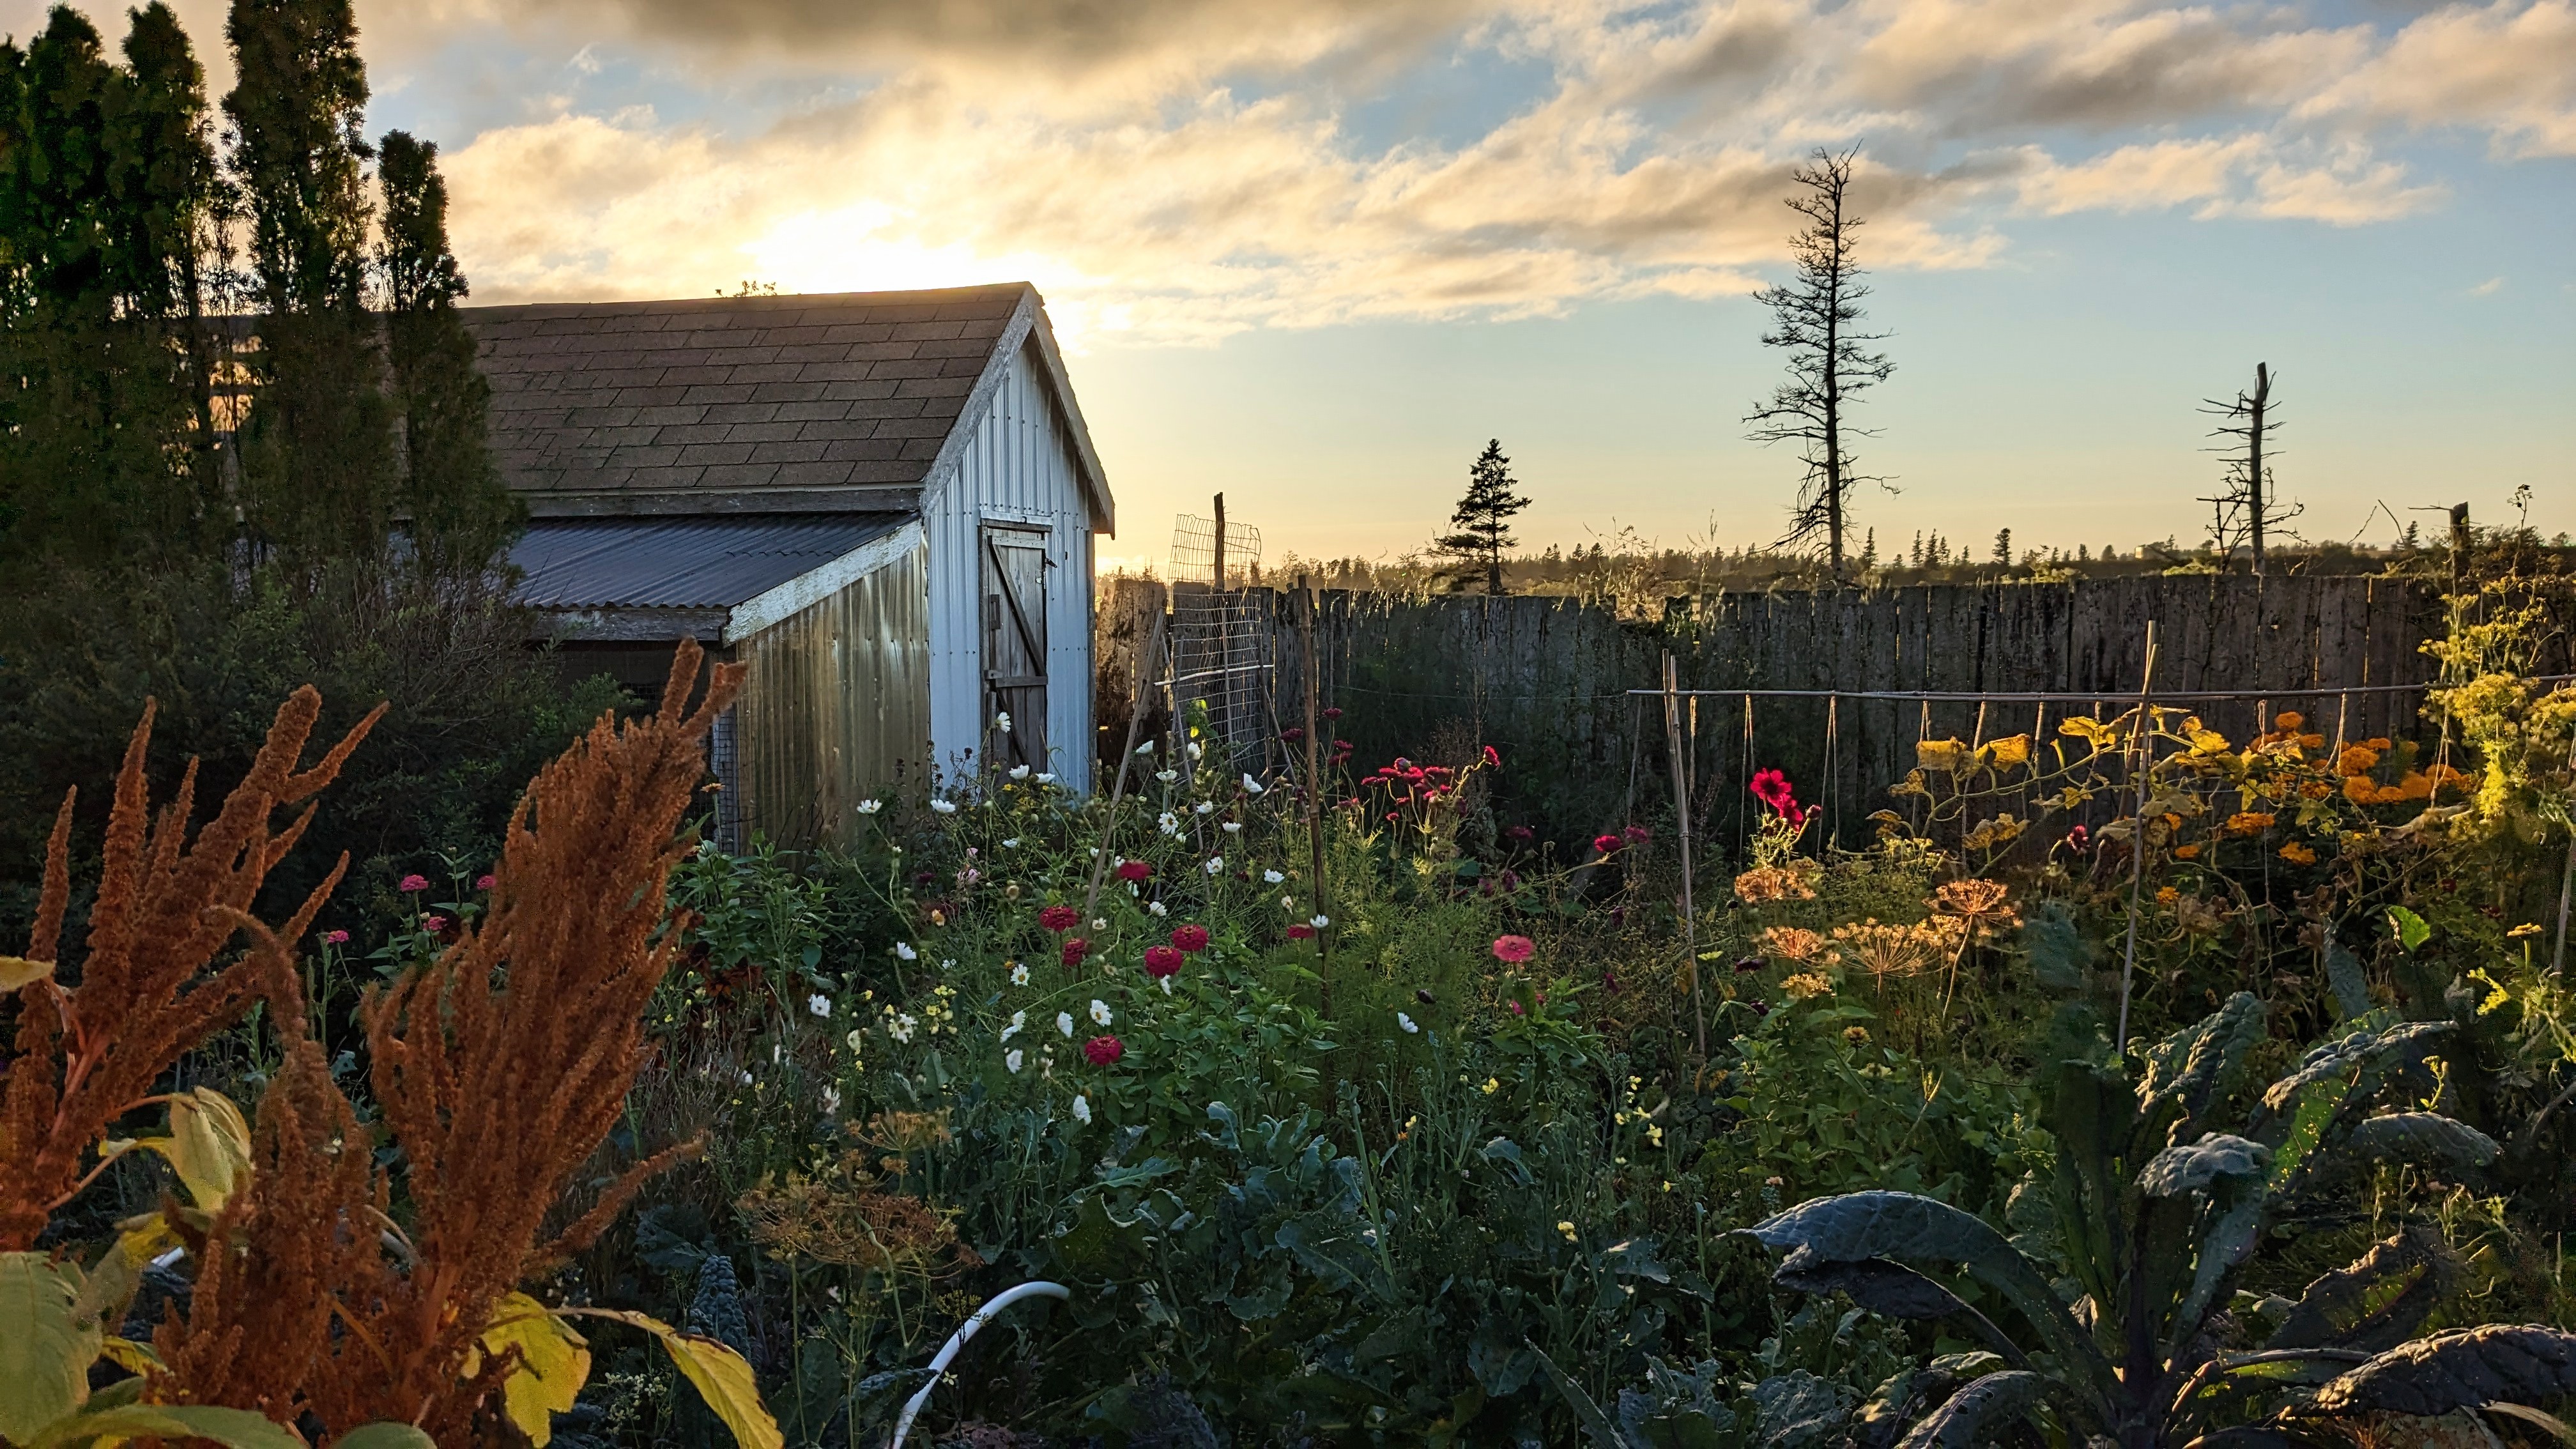 Veggie garden and shed at sunset.